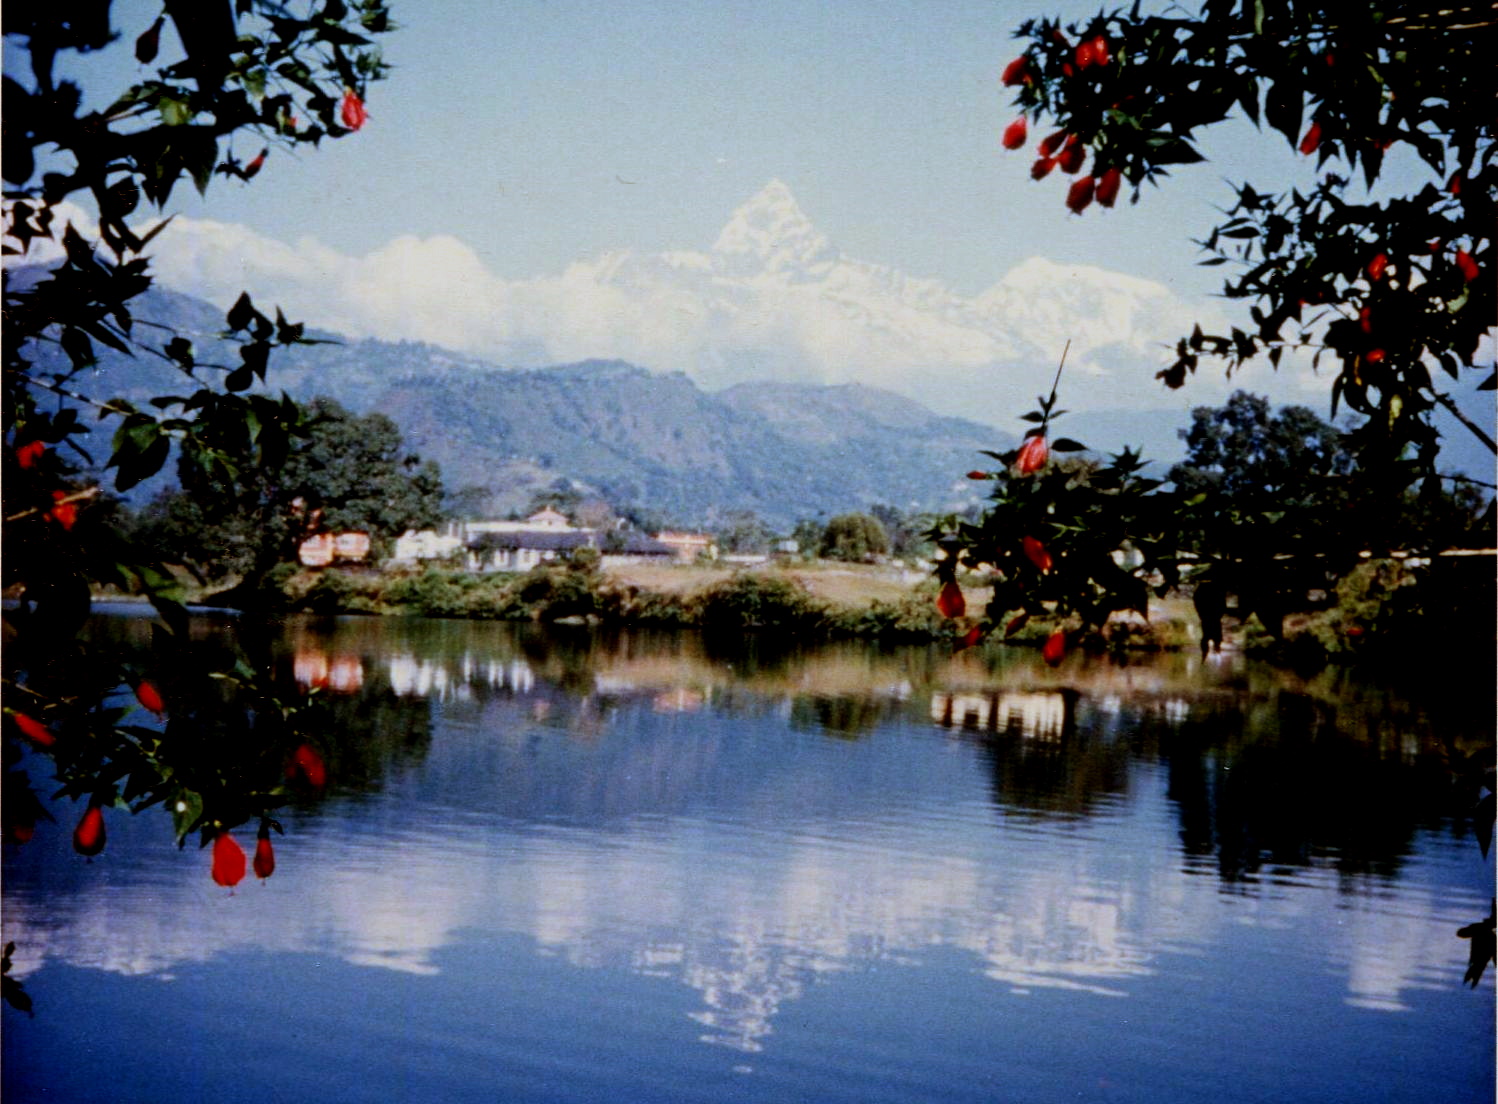 Mount Macchapucchre ( The Fishtail Mountain ) from Phewa Tal at Pokhara in Nepal